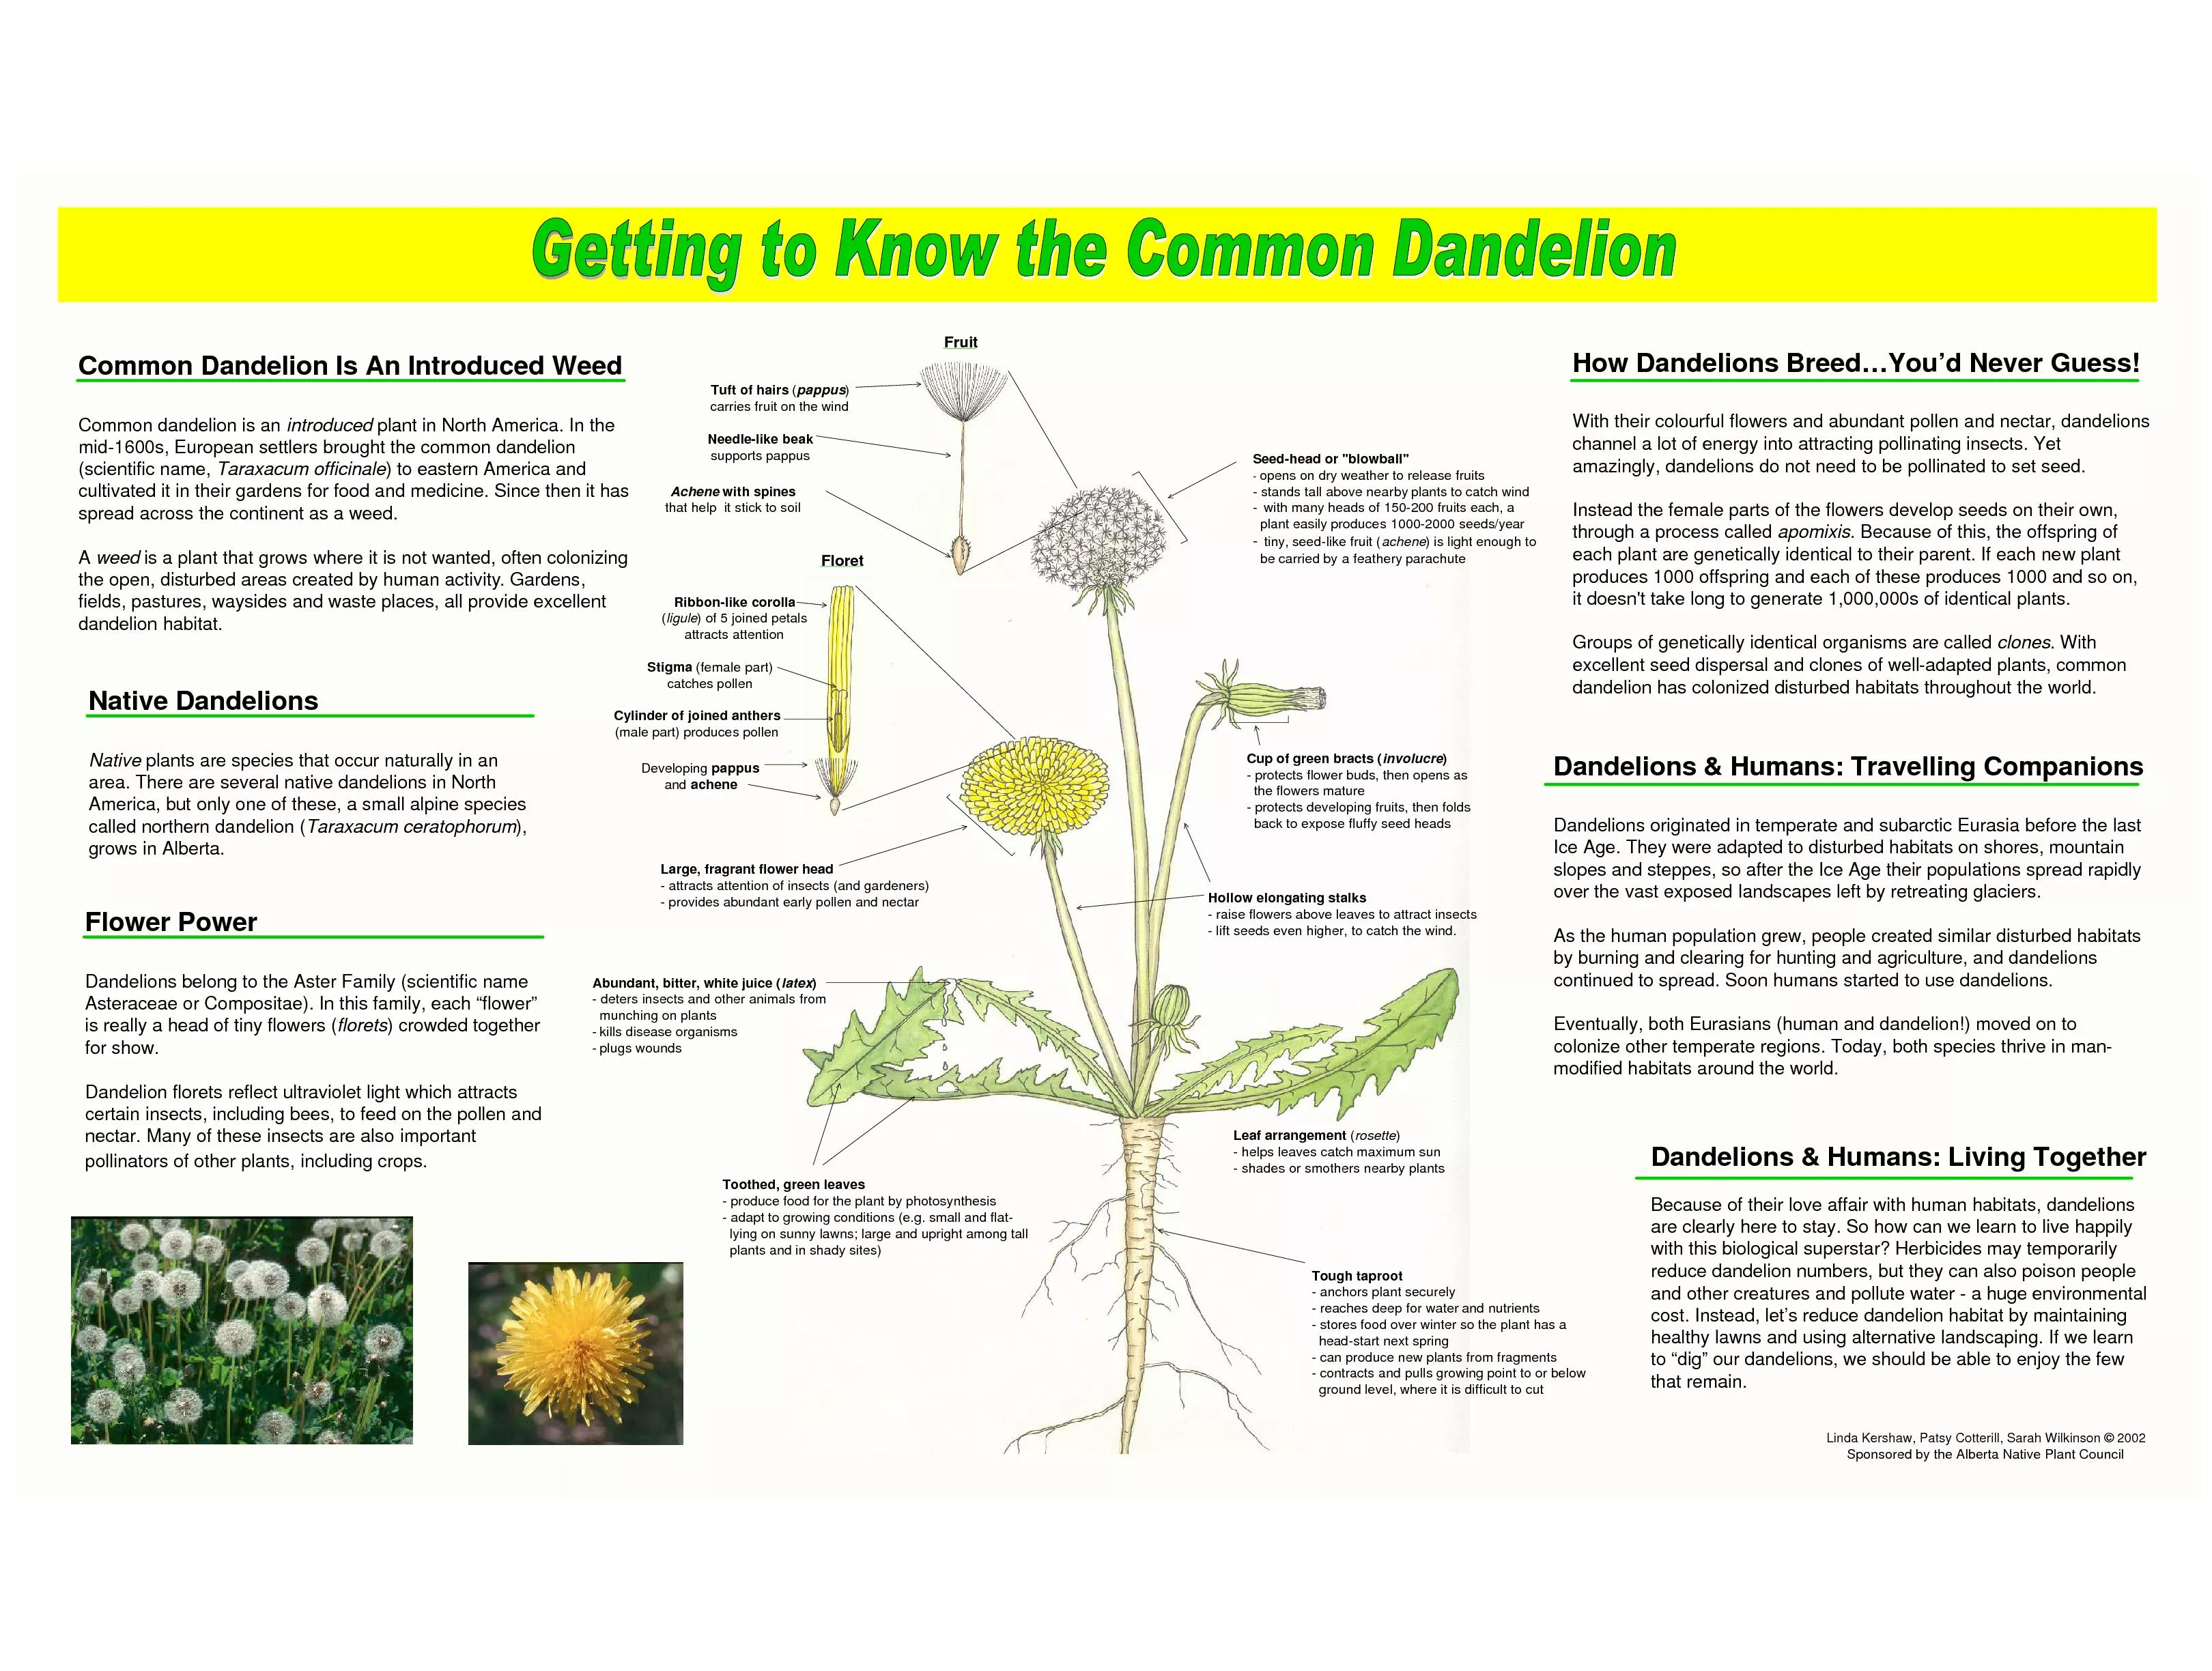 Native DandelionsNativeplants are species that occur naturally in an a